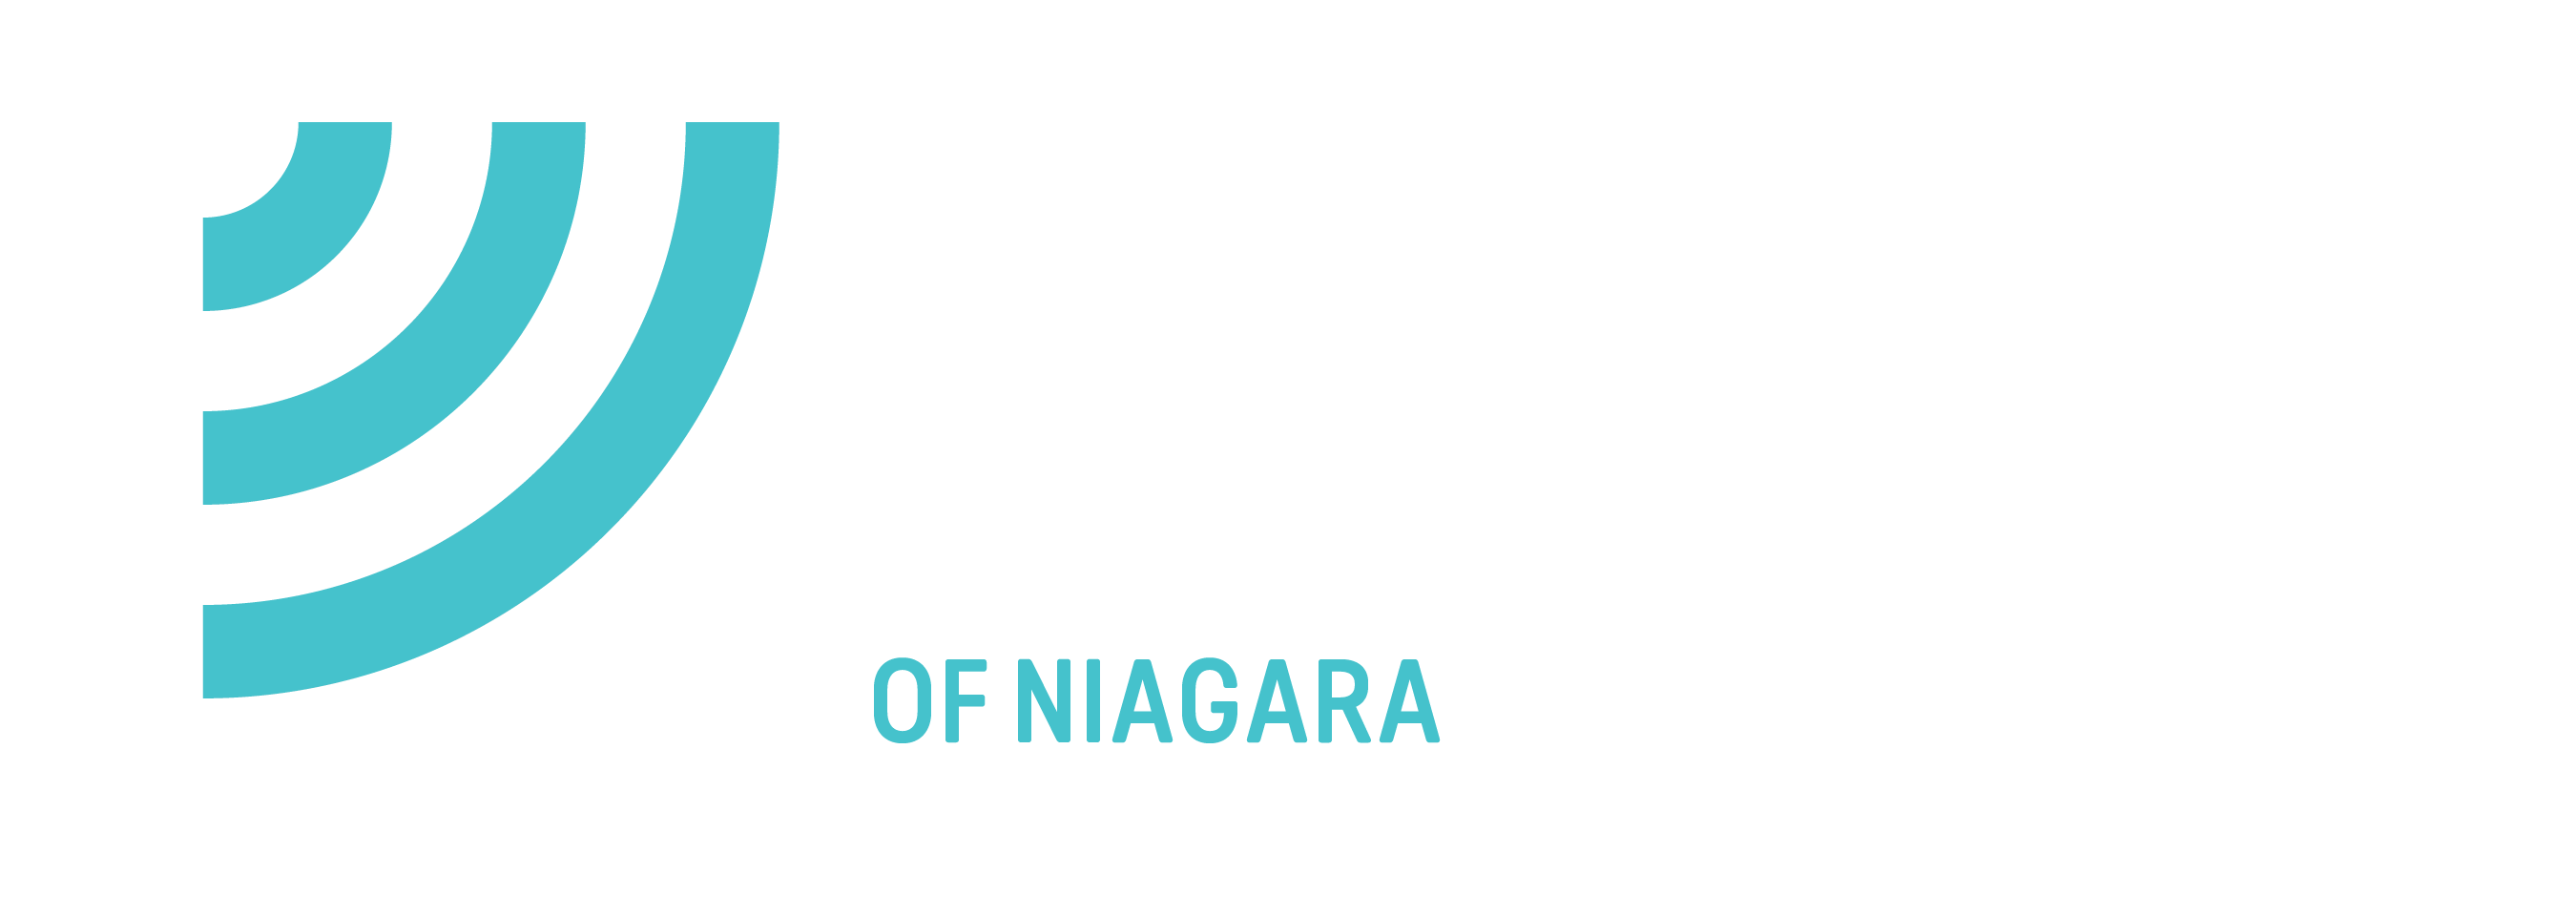 MAKING A “BIG” DIFFERENCE IN DOMINICAN REPUBLIC - Big Brothers Big Sisters of Niagara